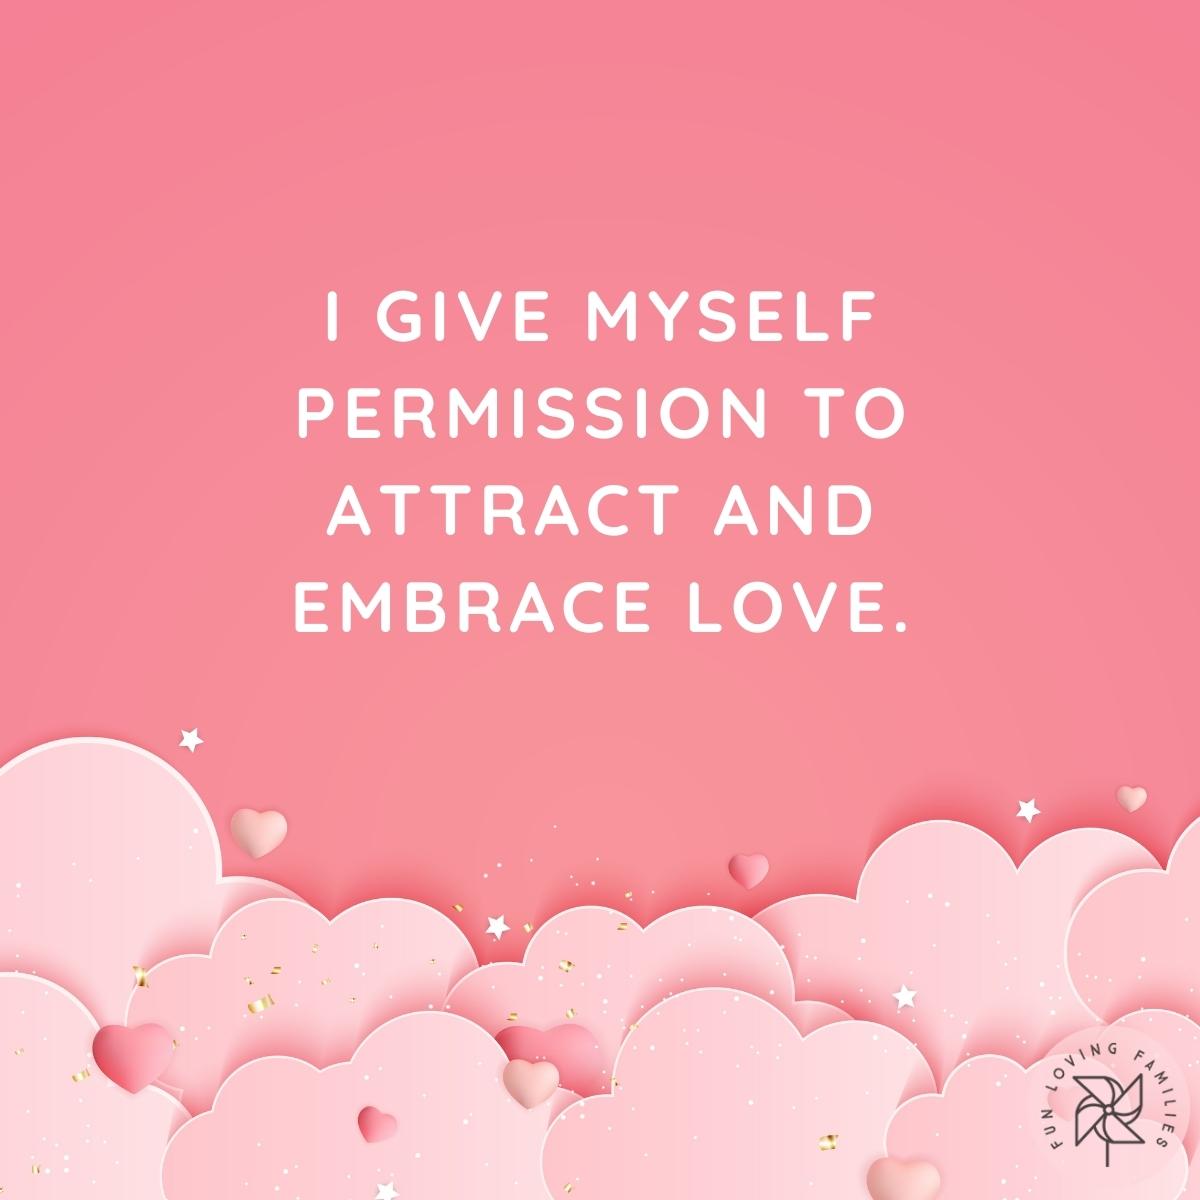 I give myself permission to attract and embrace love affirmation image